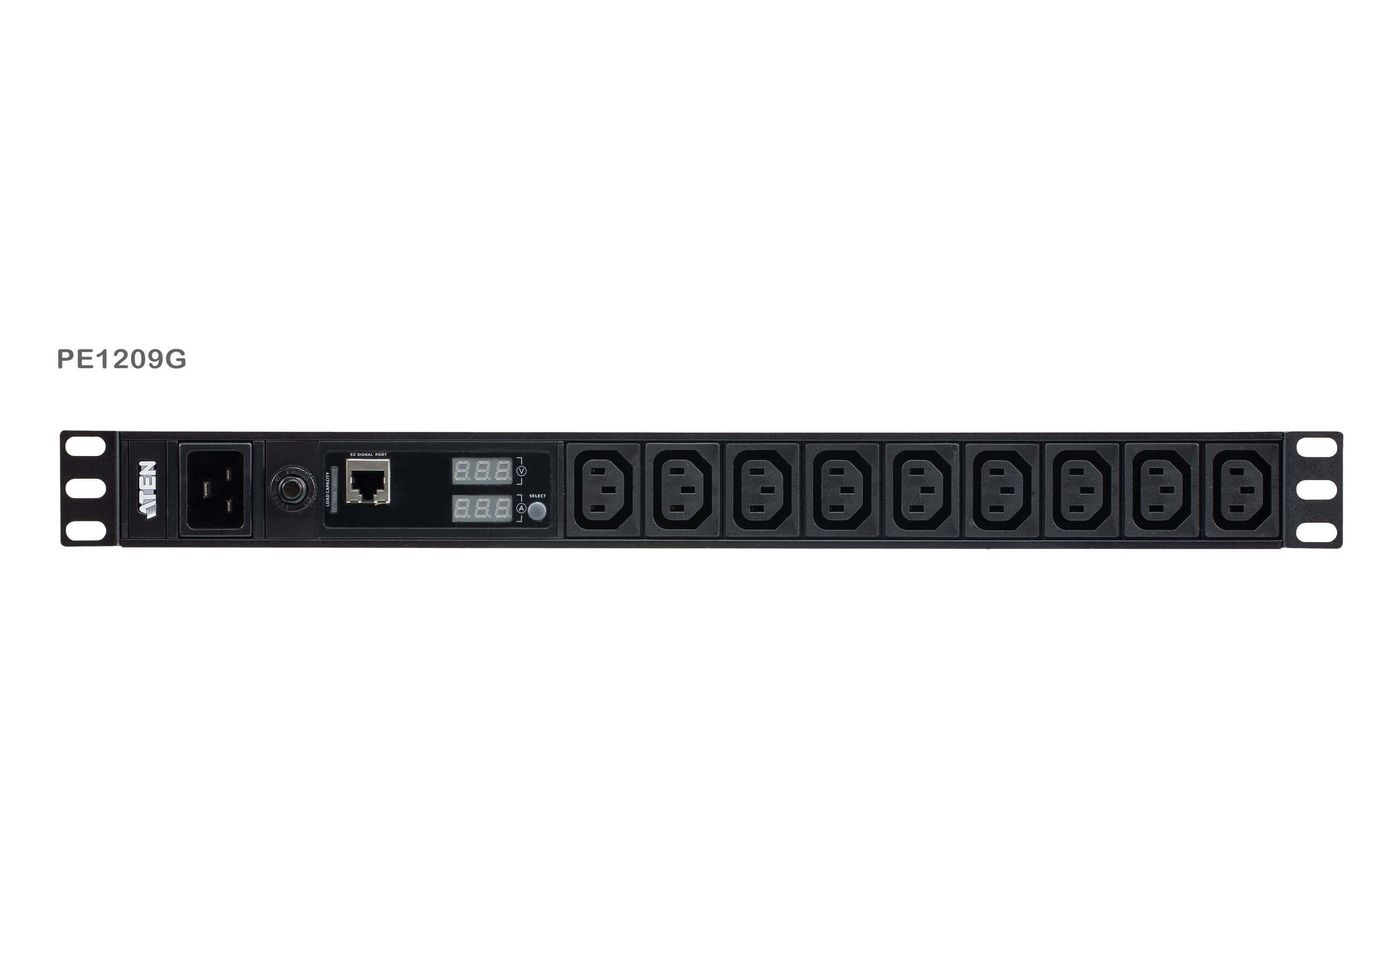 Aten PE1209G-AT-G W127285136 9-Outlet 1U PDU with Current 